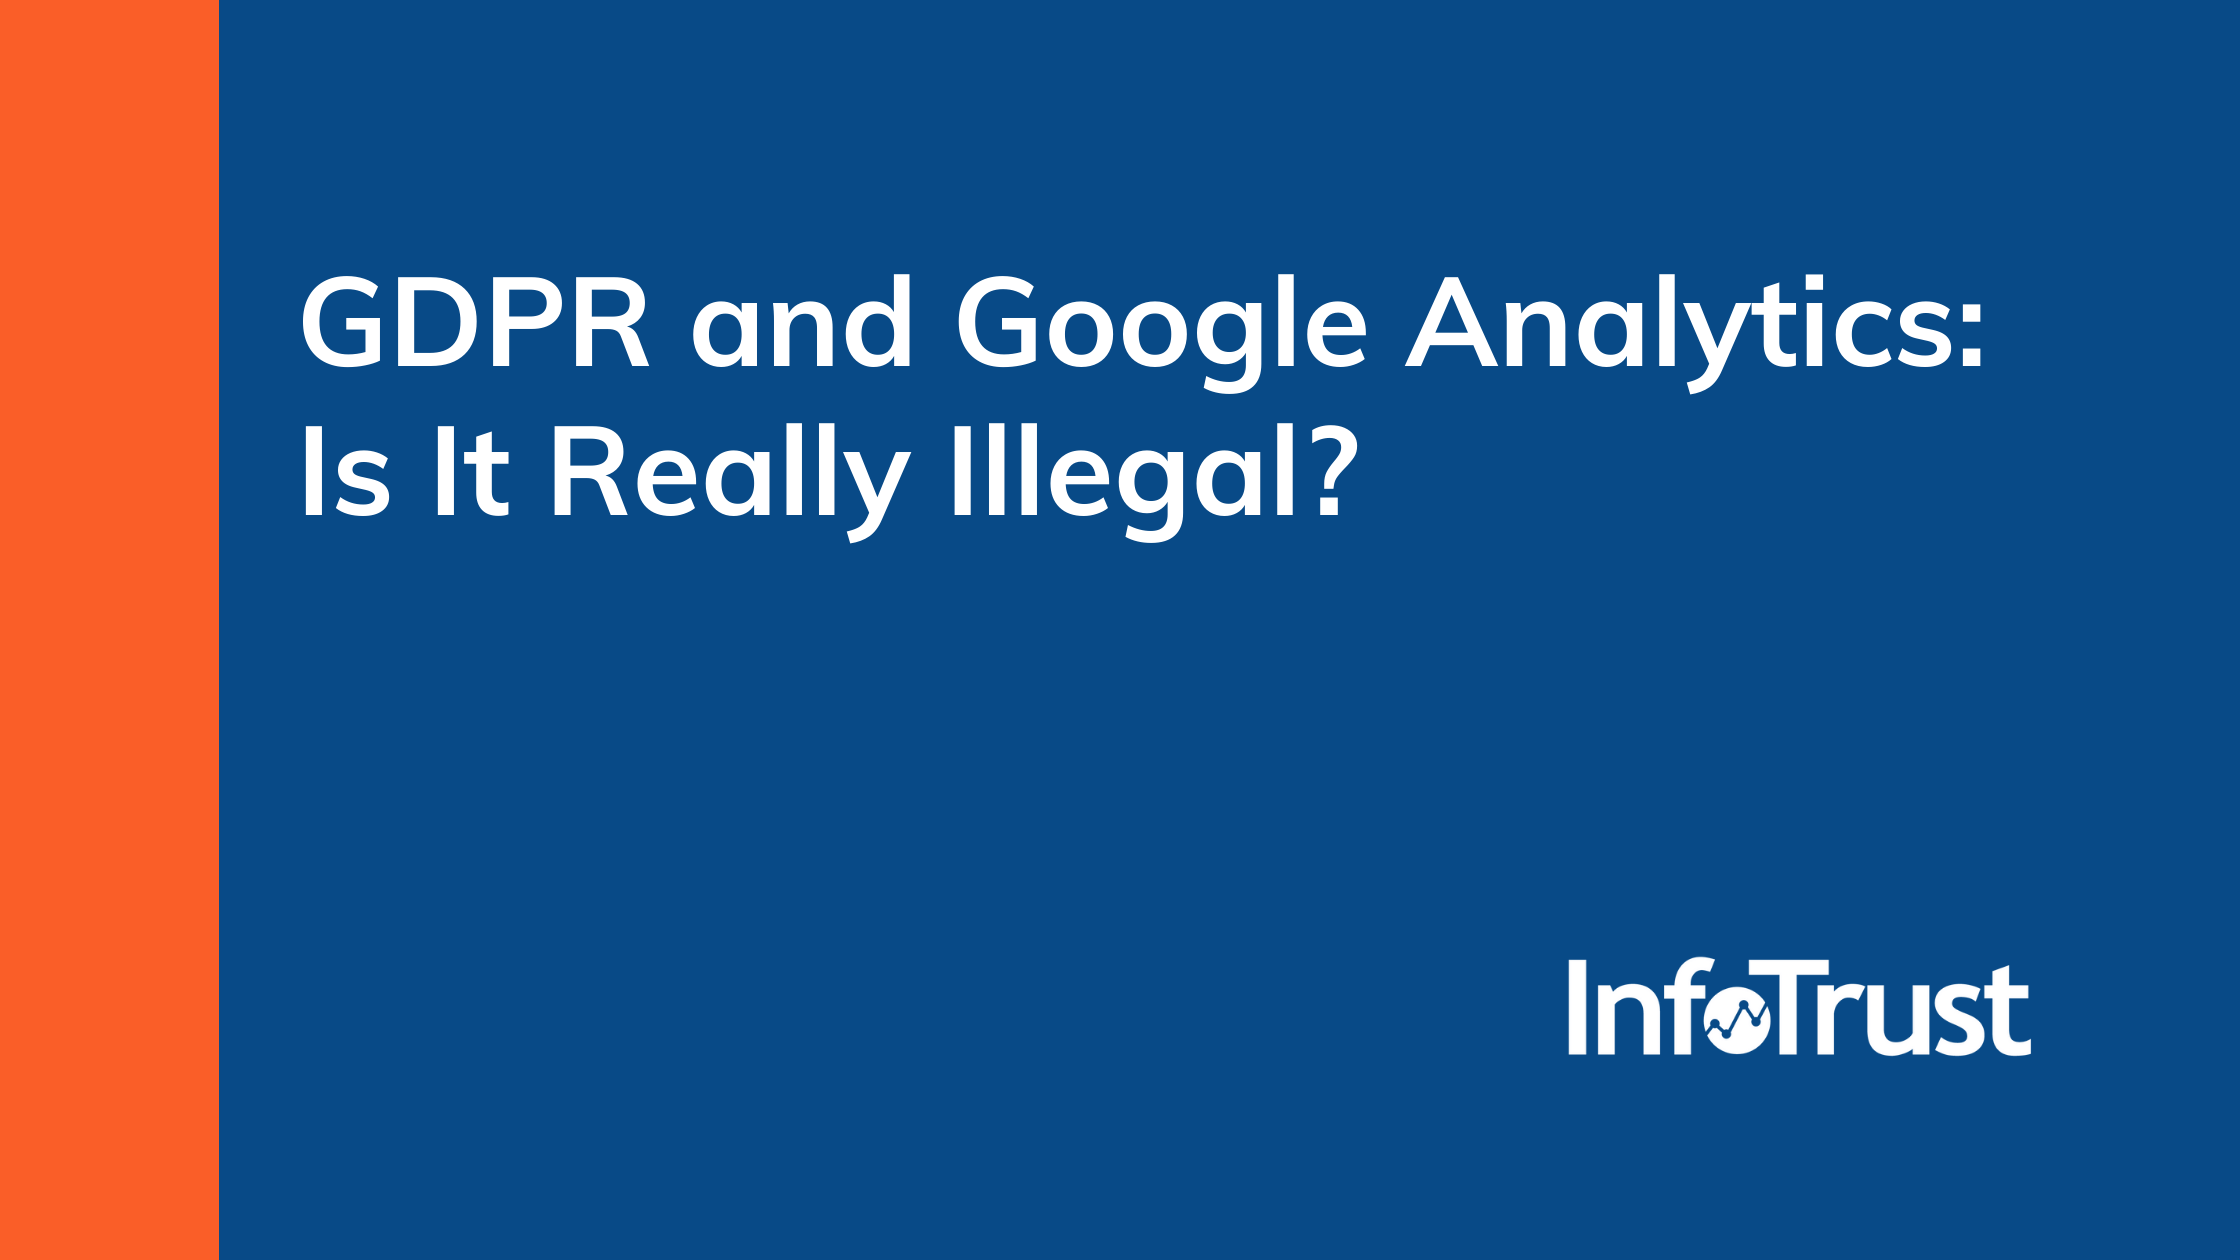 GDPR and Google Analytics: Is It Really Illegal?